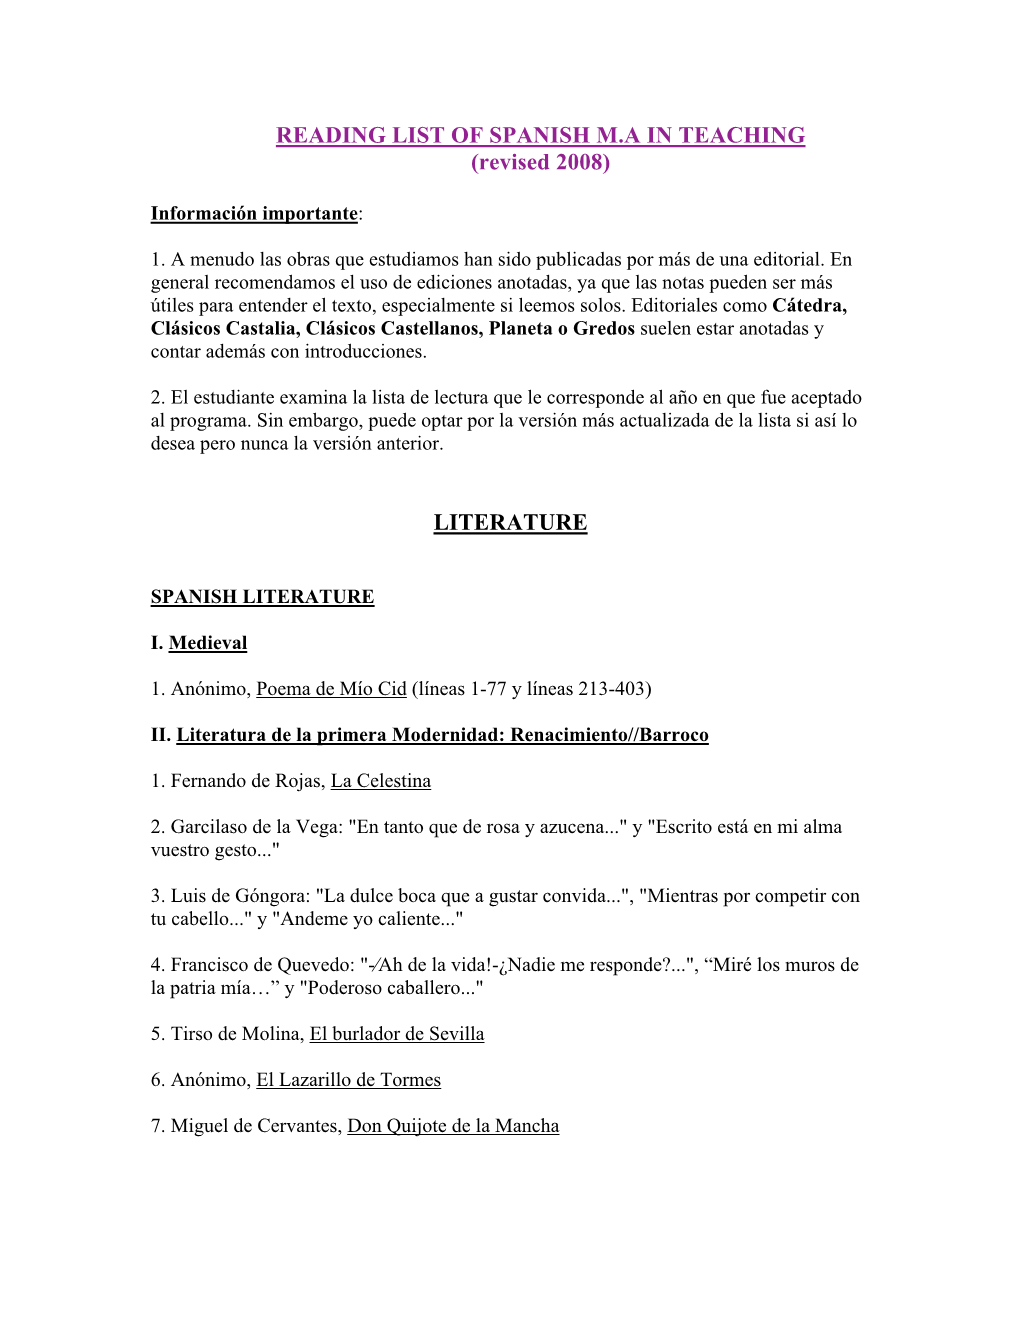 READING LIST of SPANISH M.A in TEACHING (Revised 2008)